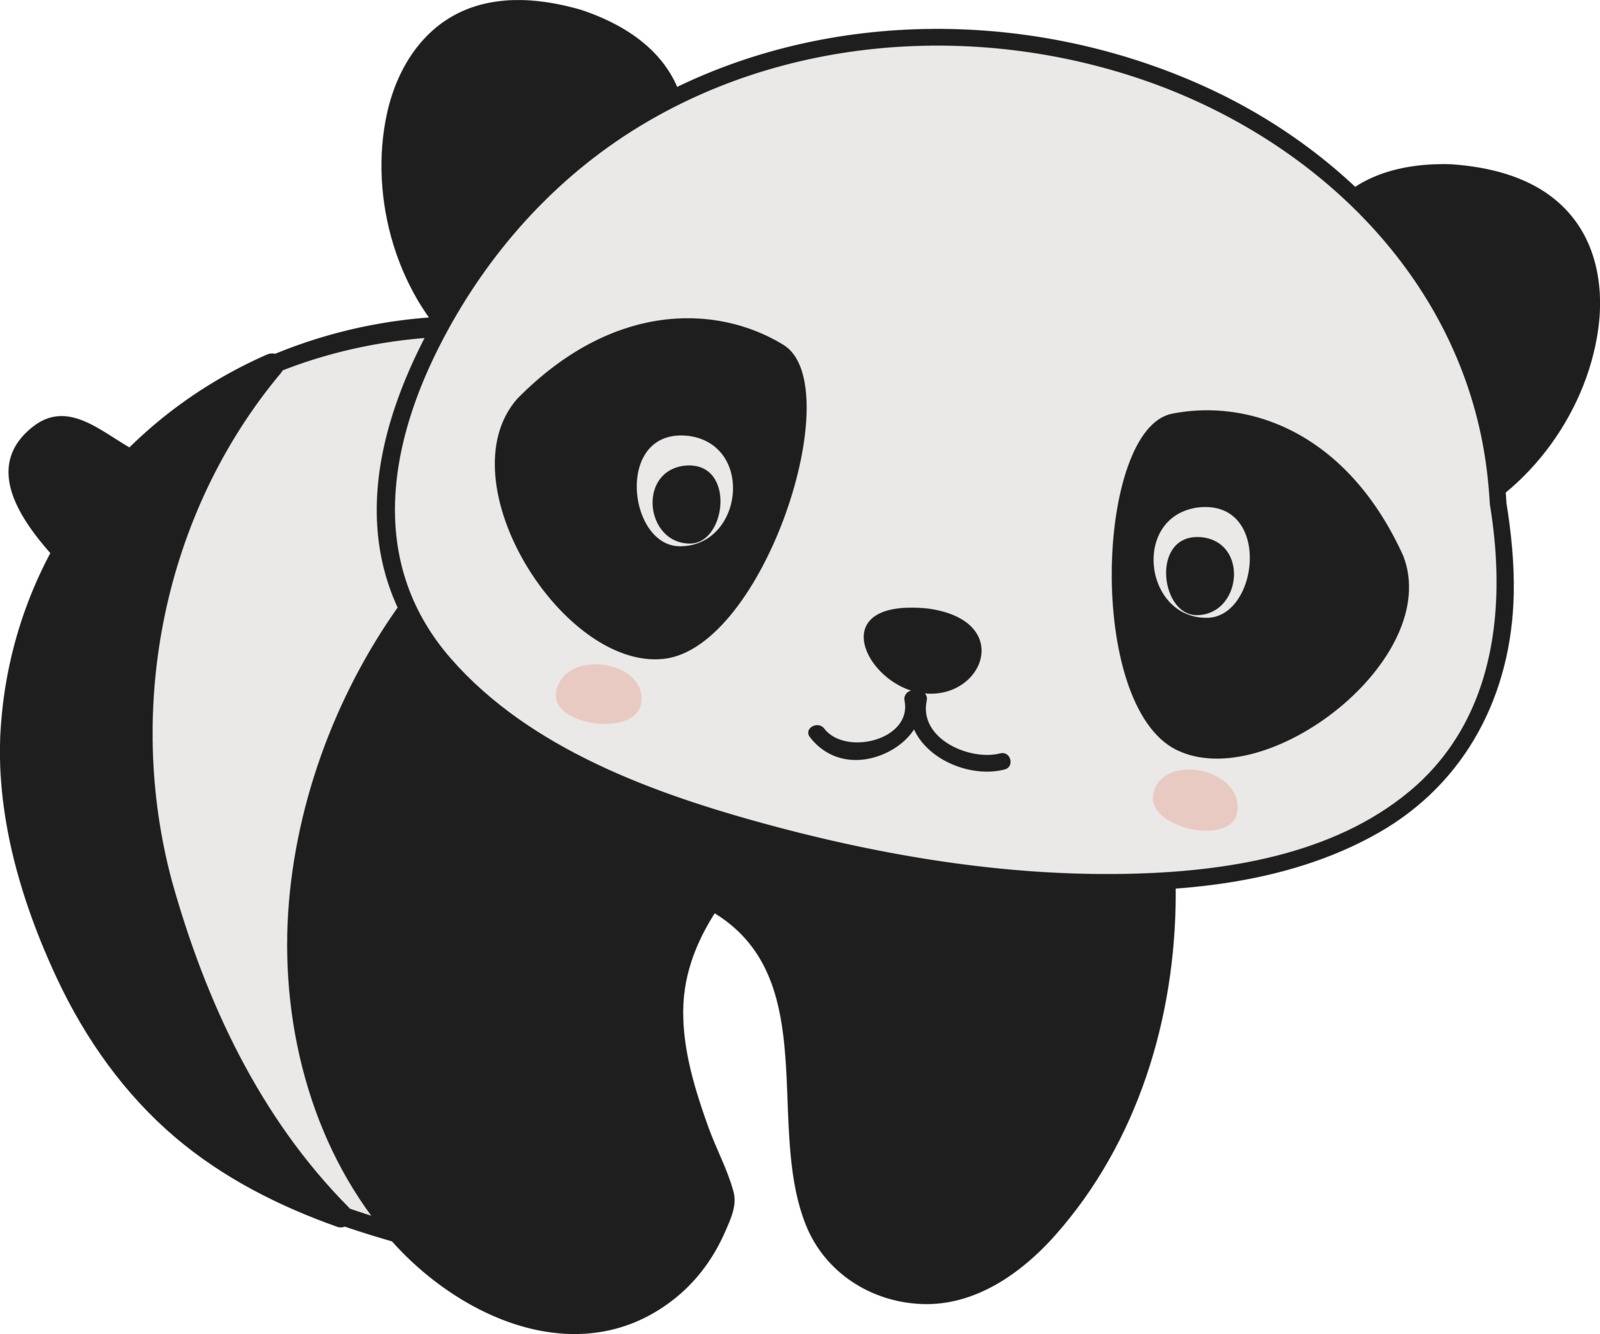 Cute baby panda, illustration, vector on white background.